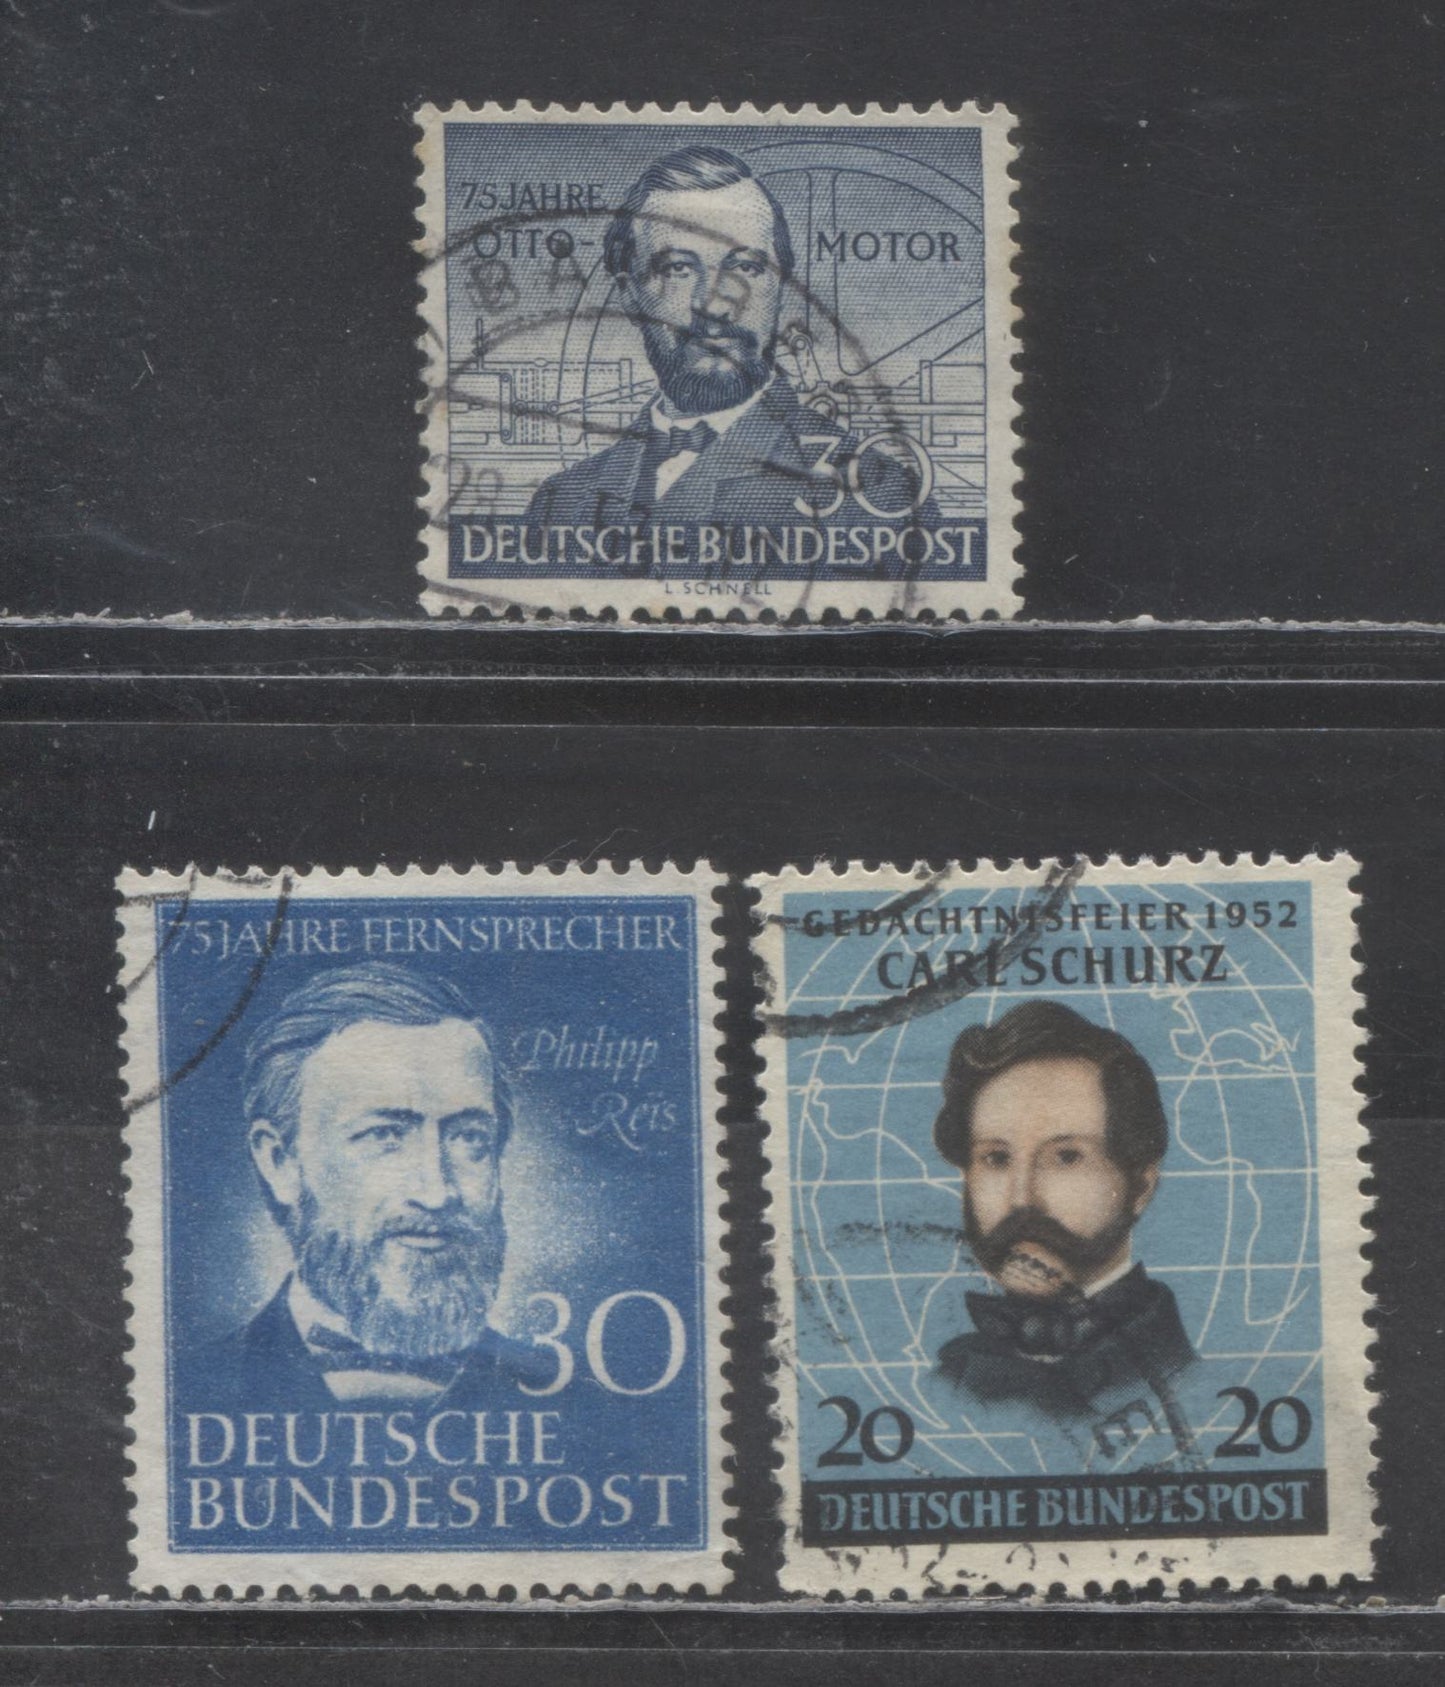 Lot 22 Germany SC#688/693 1952 75th Anniversary Of The 4 Cycle Gas Engine - 75th Years Of Telephone Service Issues, 3 Very Fine Used Singles, Click on Listing to See ALL Pictures, Estimated Value $25